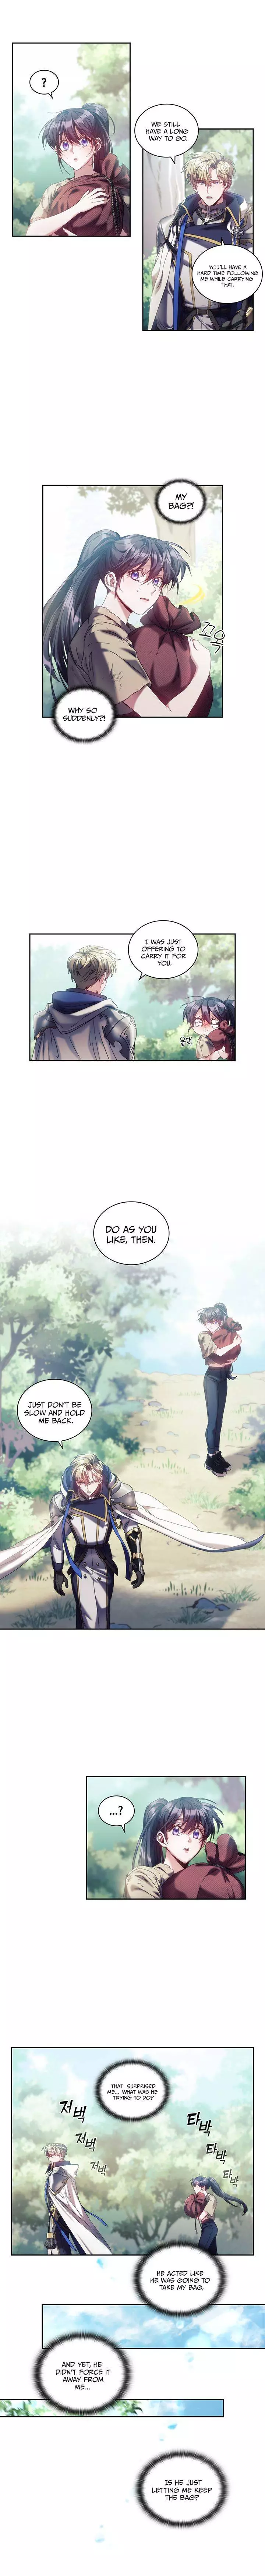 The Thorn That Pierces Me - 9 page 4